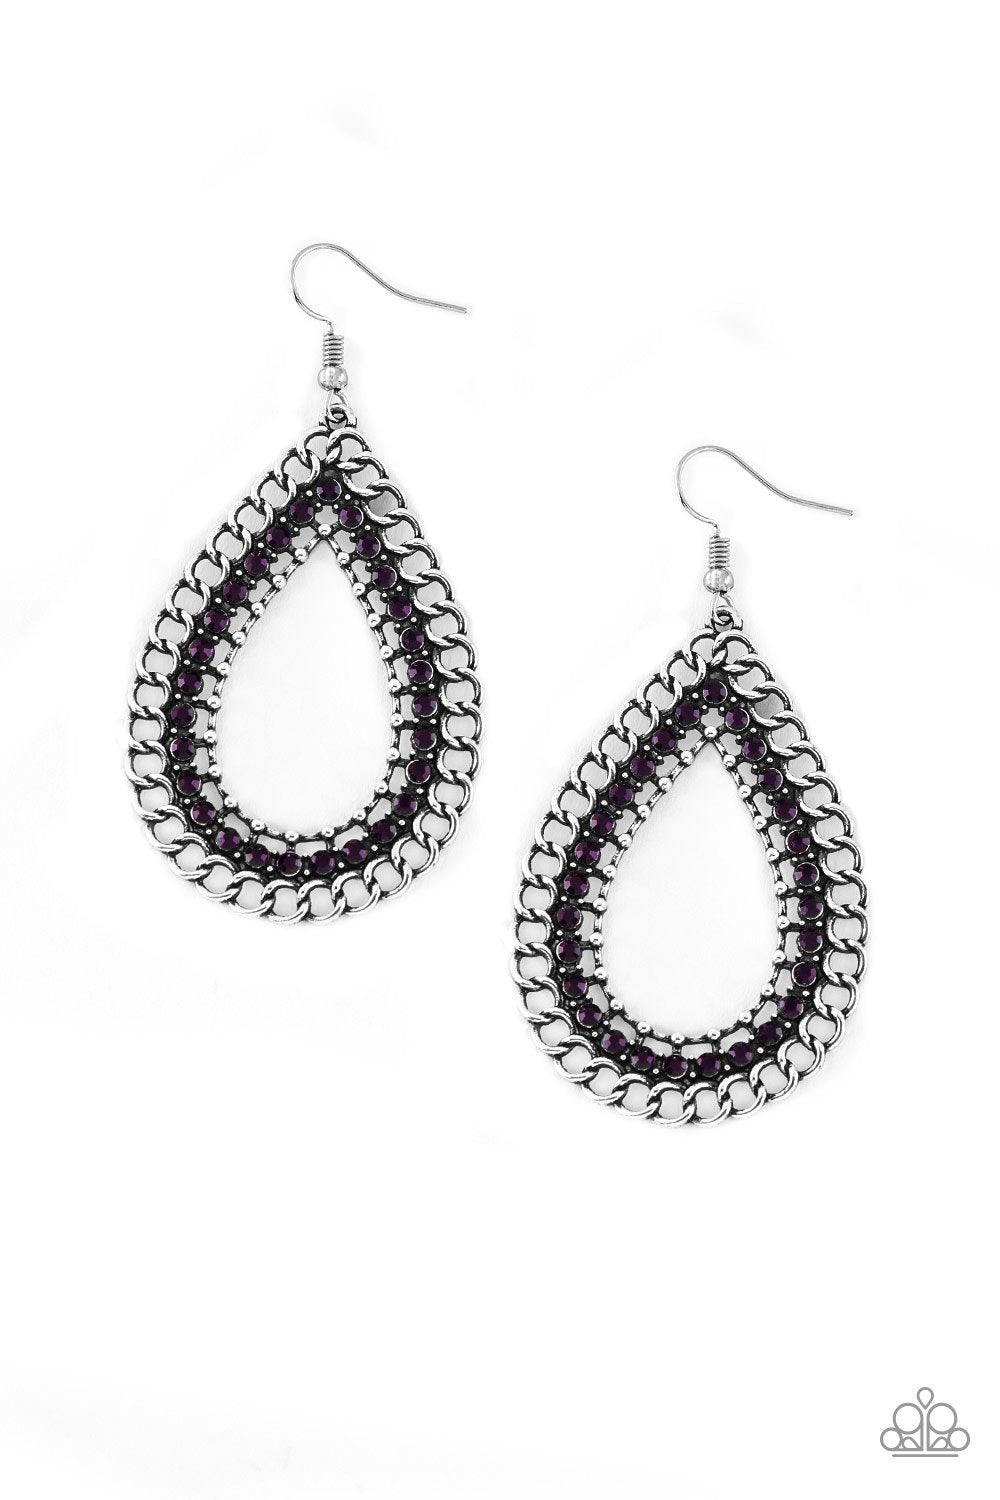 Mechanical Marvel Purple Gem and Silver Chain Teardrop Earrings - Paparazzi Accessories-CarasShop.com - $5 Jewelry by Cara Jewels